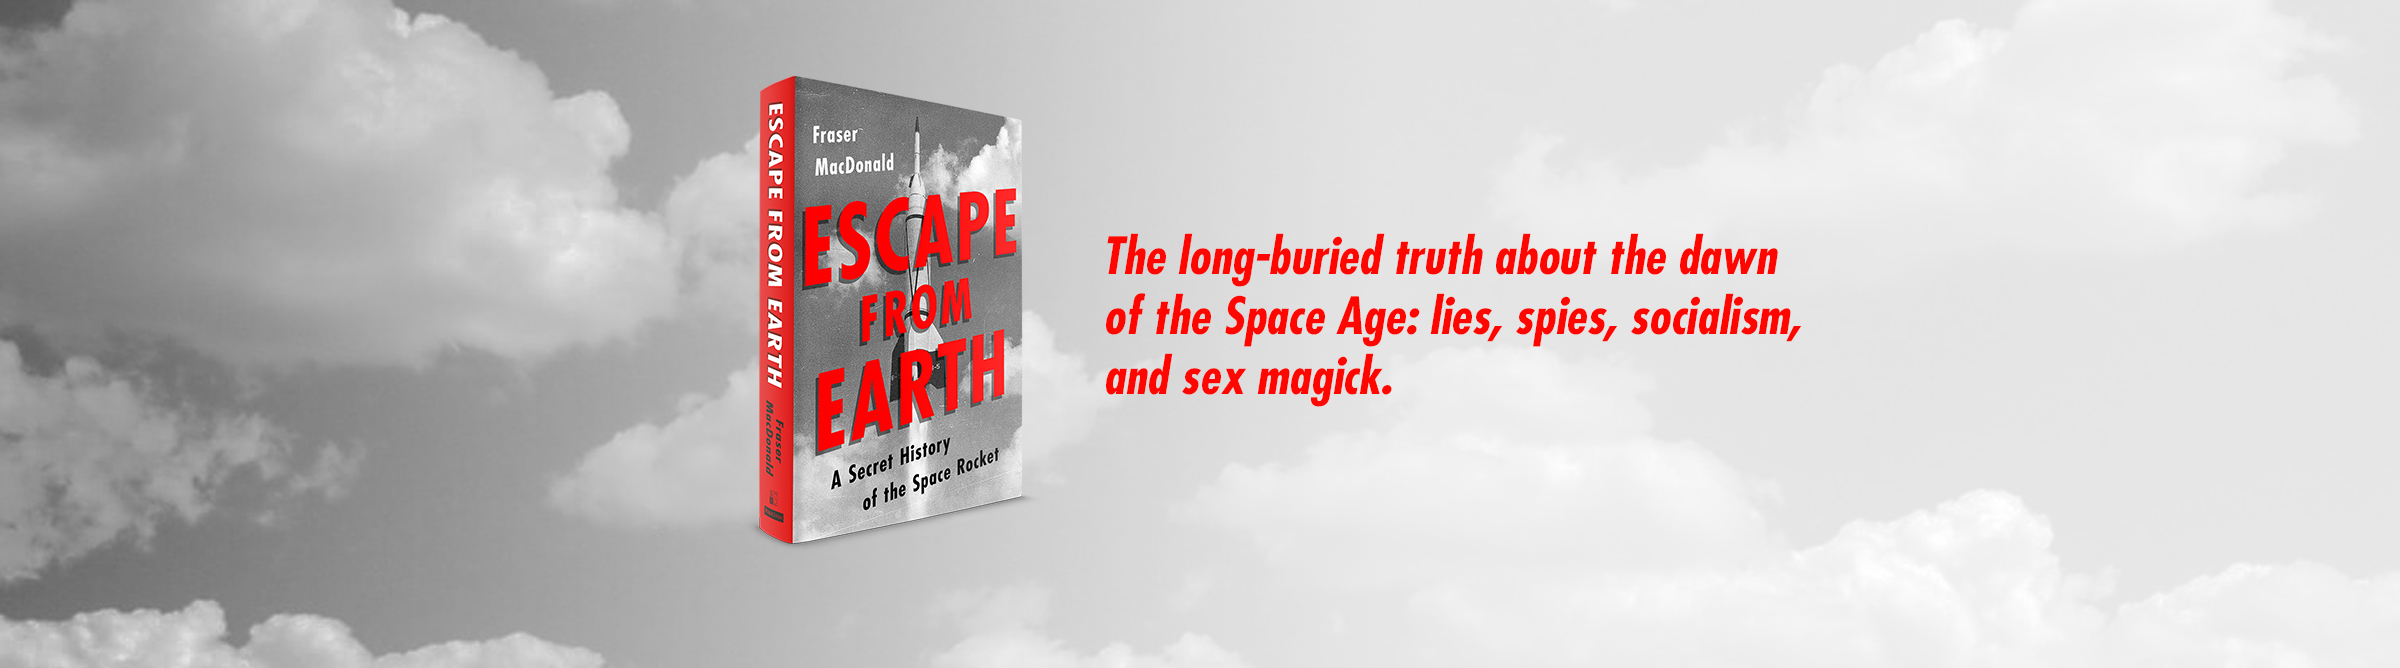 Escape from Earth by Fraser MacDonald Hachette Book Group pic